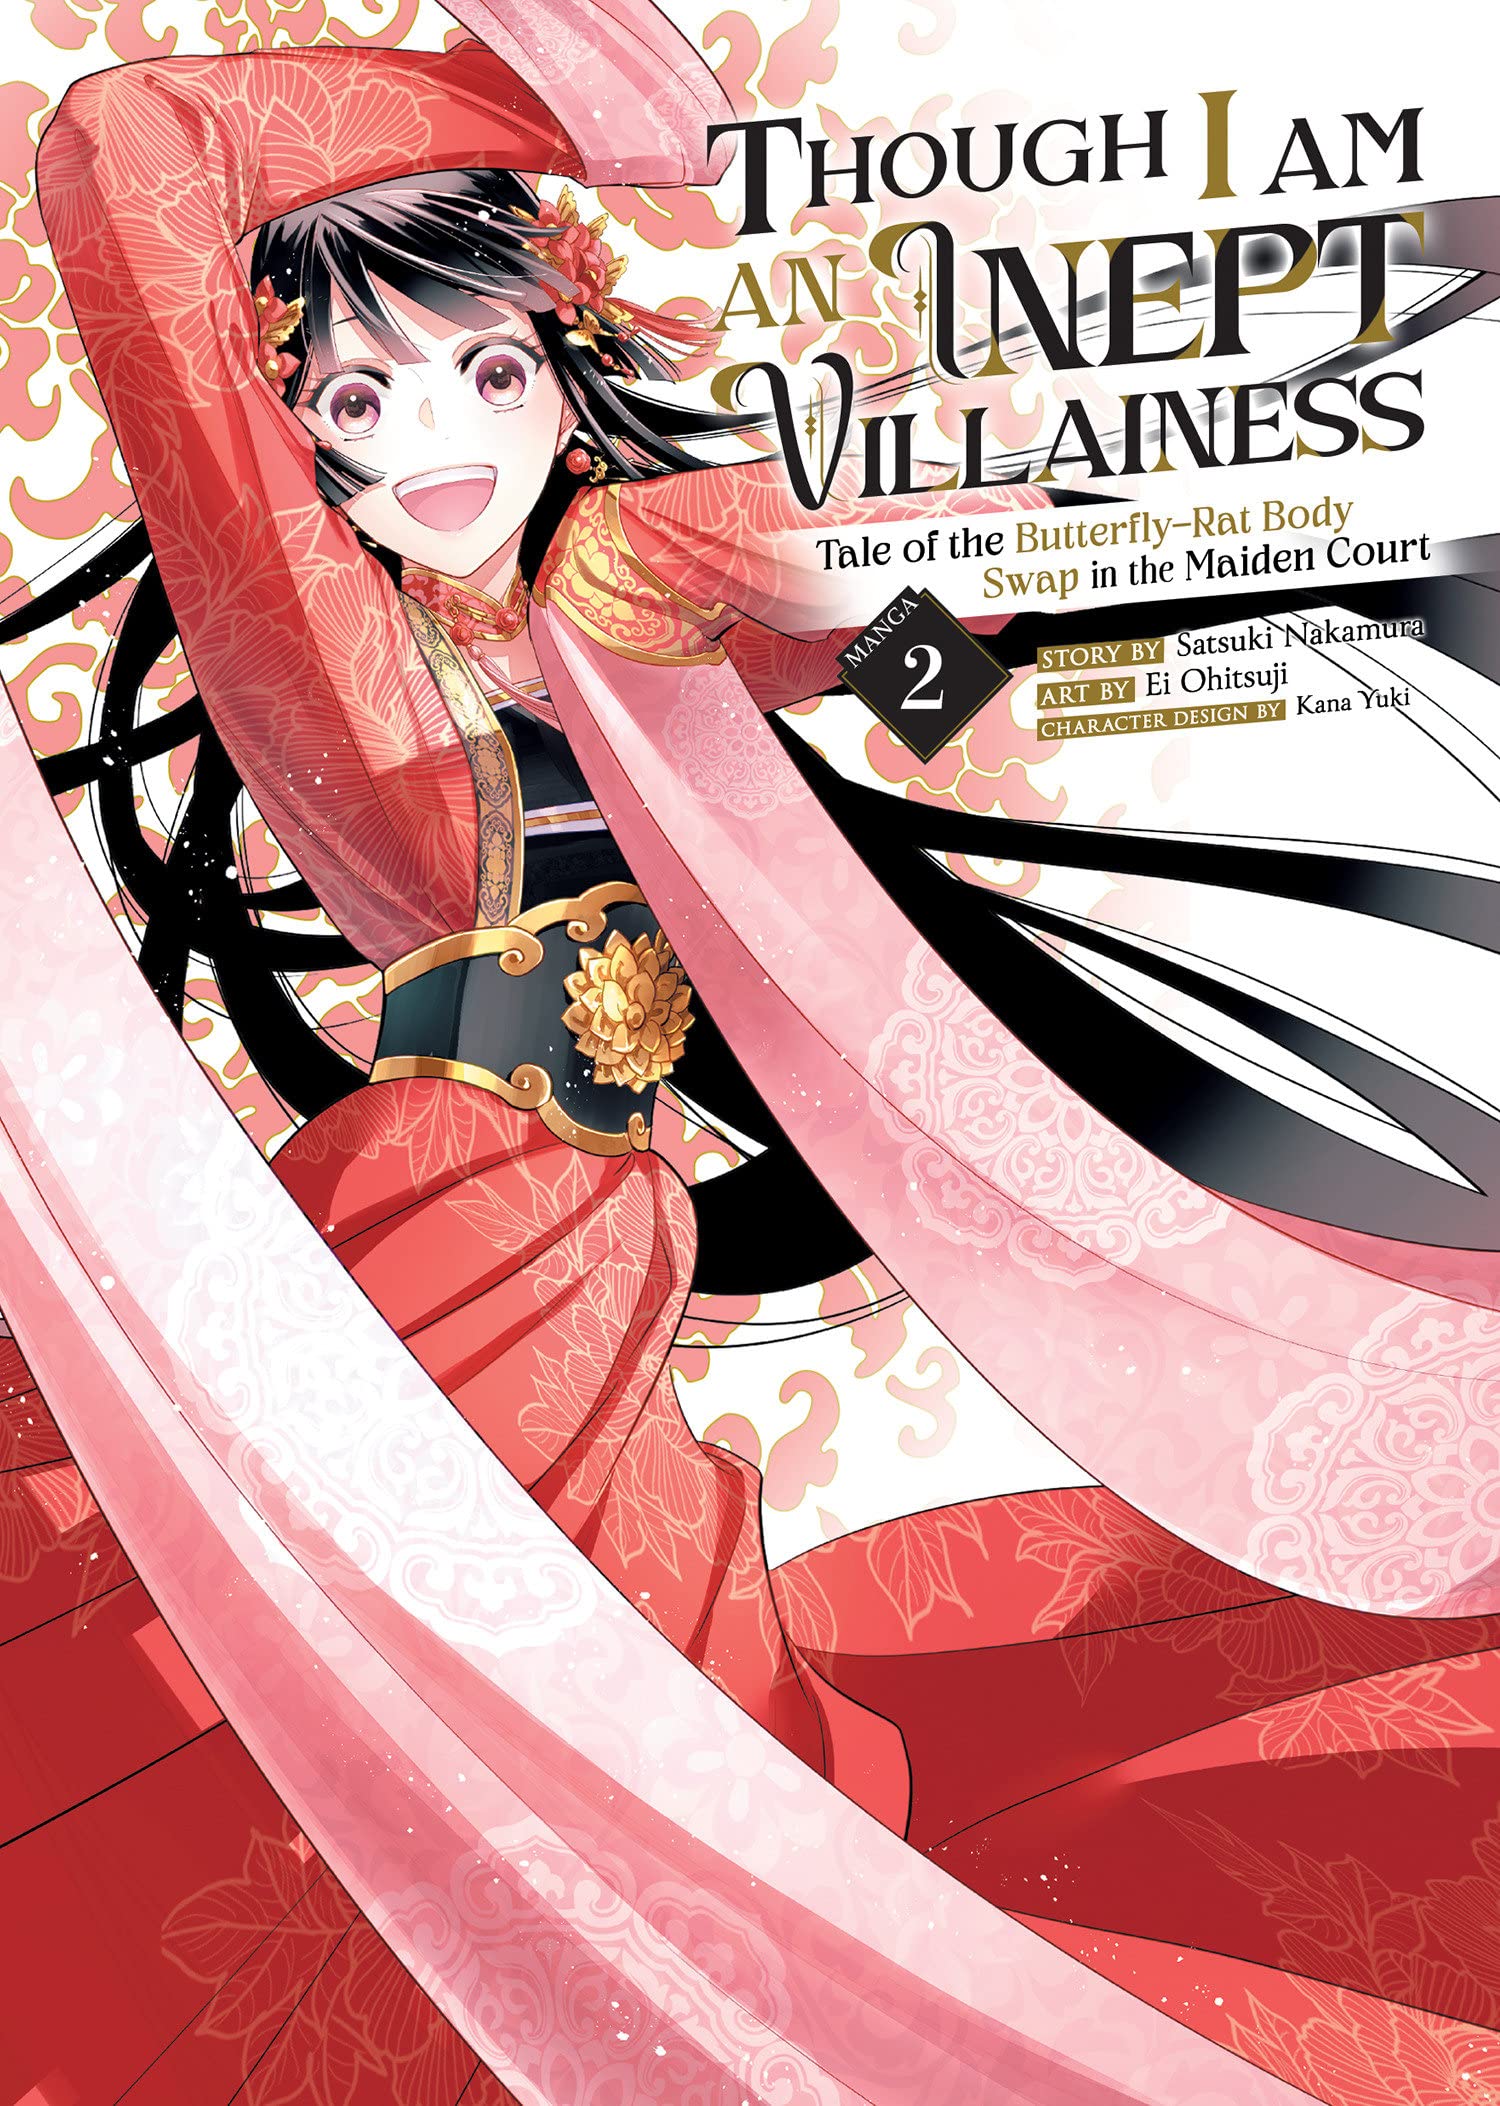 Though I Am an Inept Villainess: Tale of the Butterfly-Rat Body Swap in the Maiden Court (Manga) Vol. 02